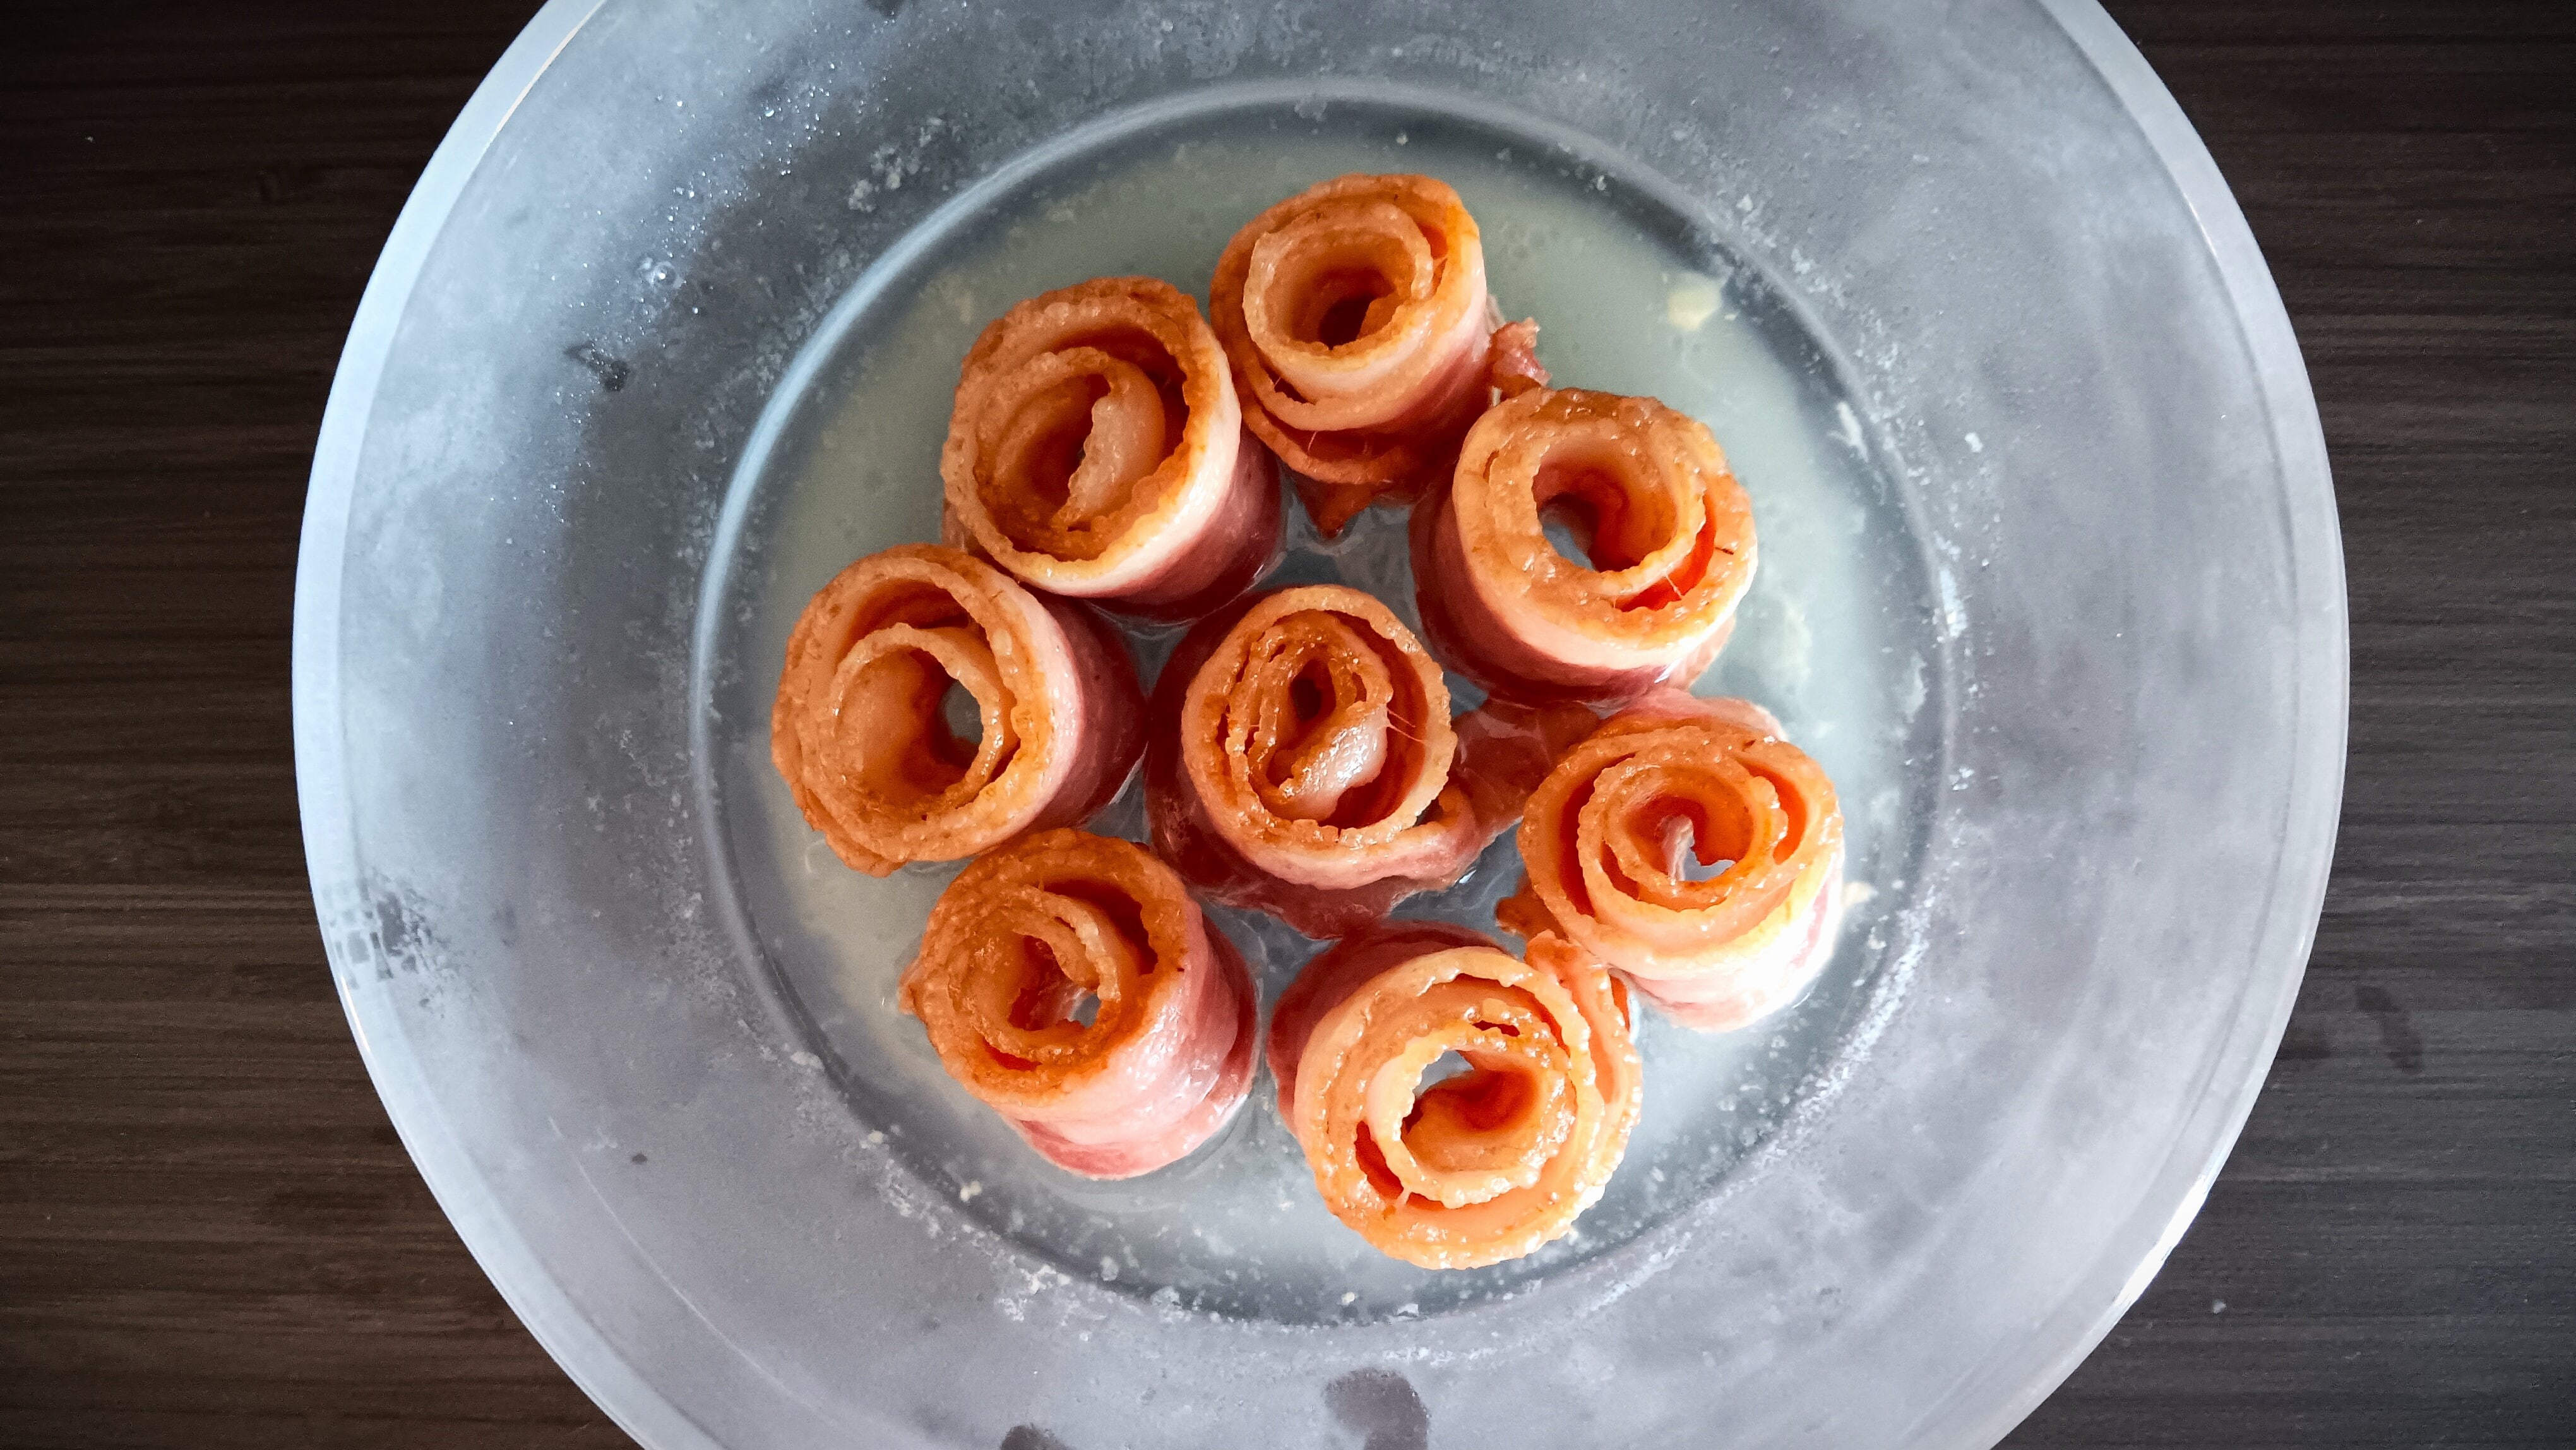 Rolled bacon / photo by Nicole Adams